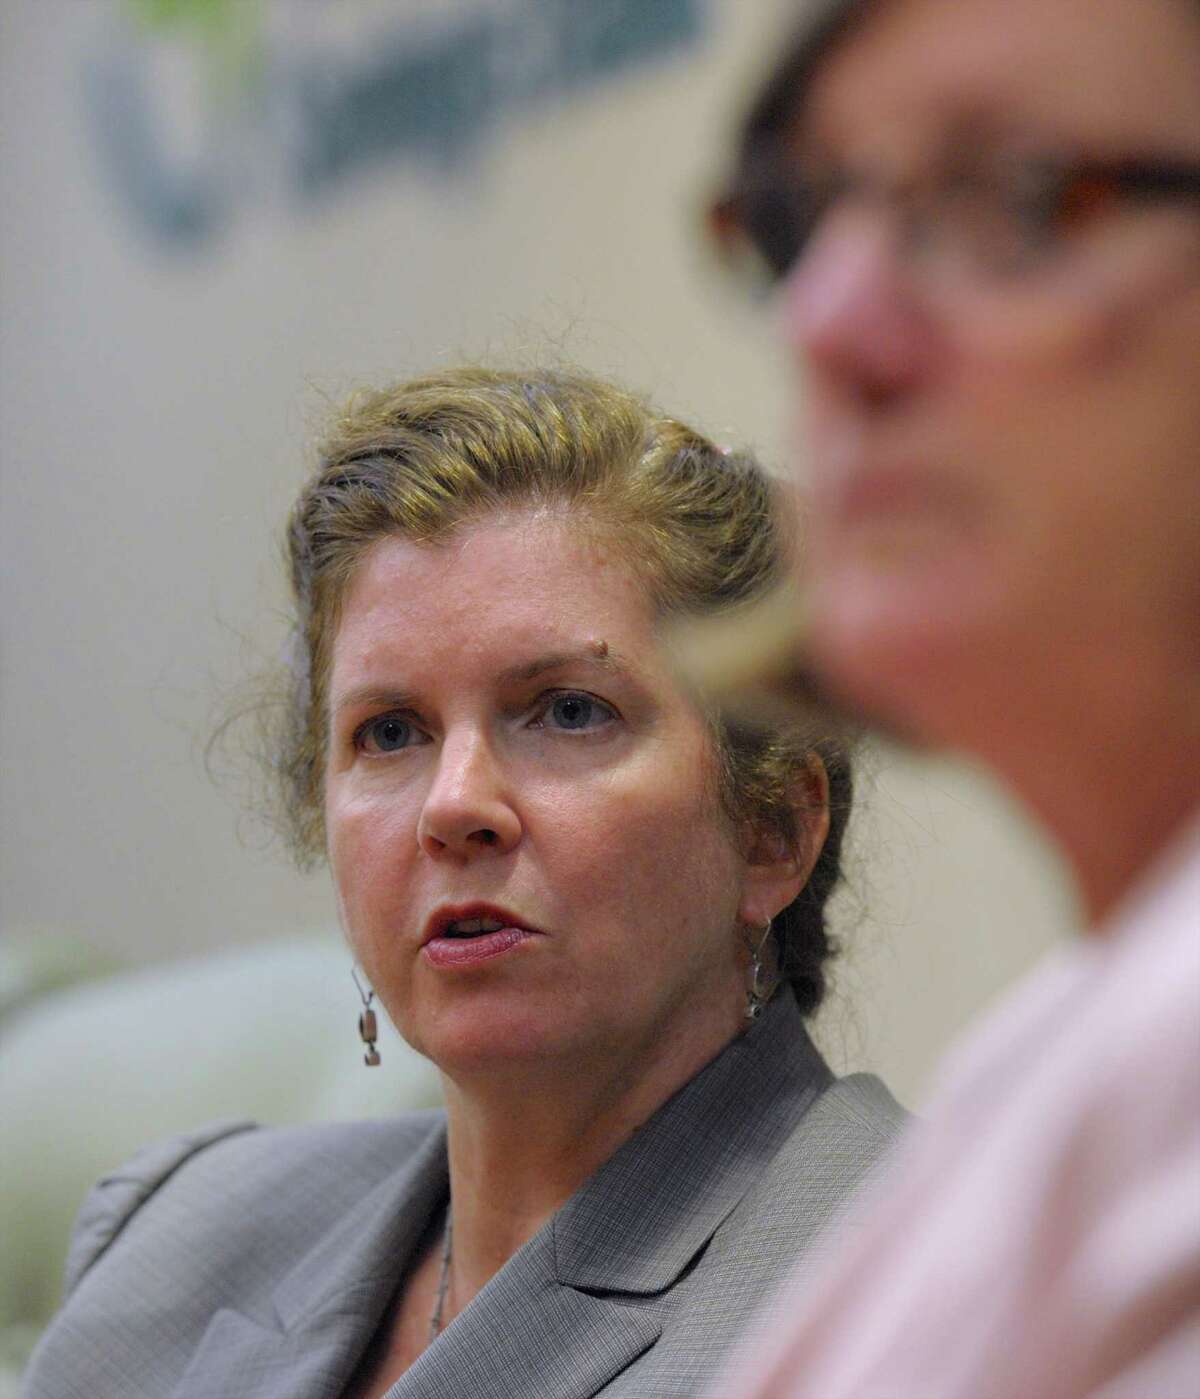 Marie O'Neill, Chief Branding & Innovation Officer, left, and Cynthia Merkle, right, President & CEO of Union Savings Bank, talk about the bank's new innovation center on Thursday, August 13, 2015, in Danbury, Conn.